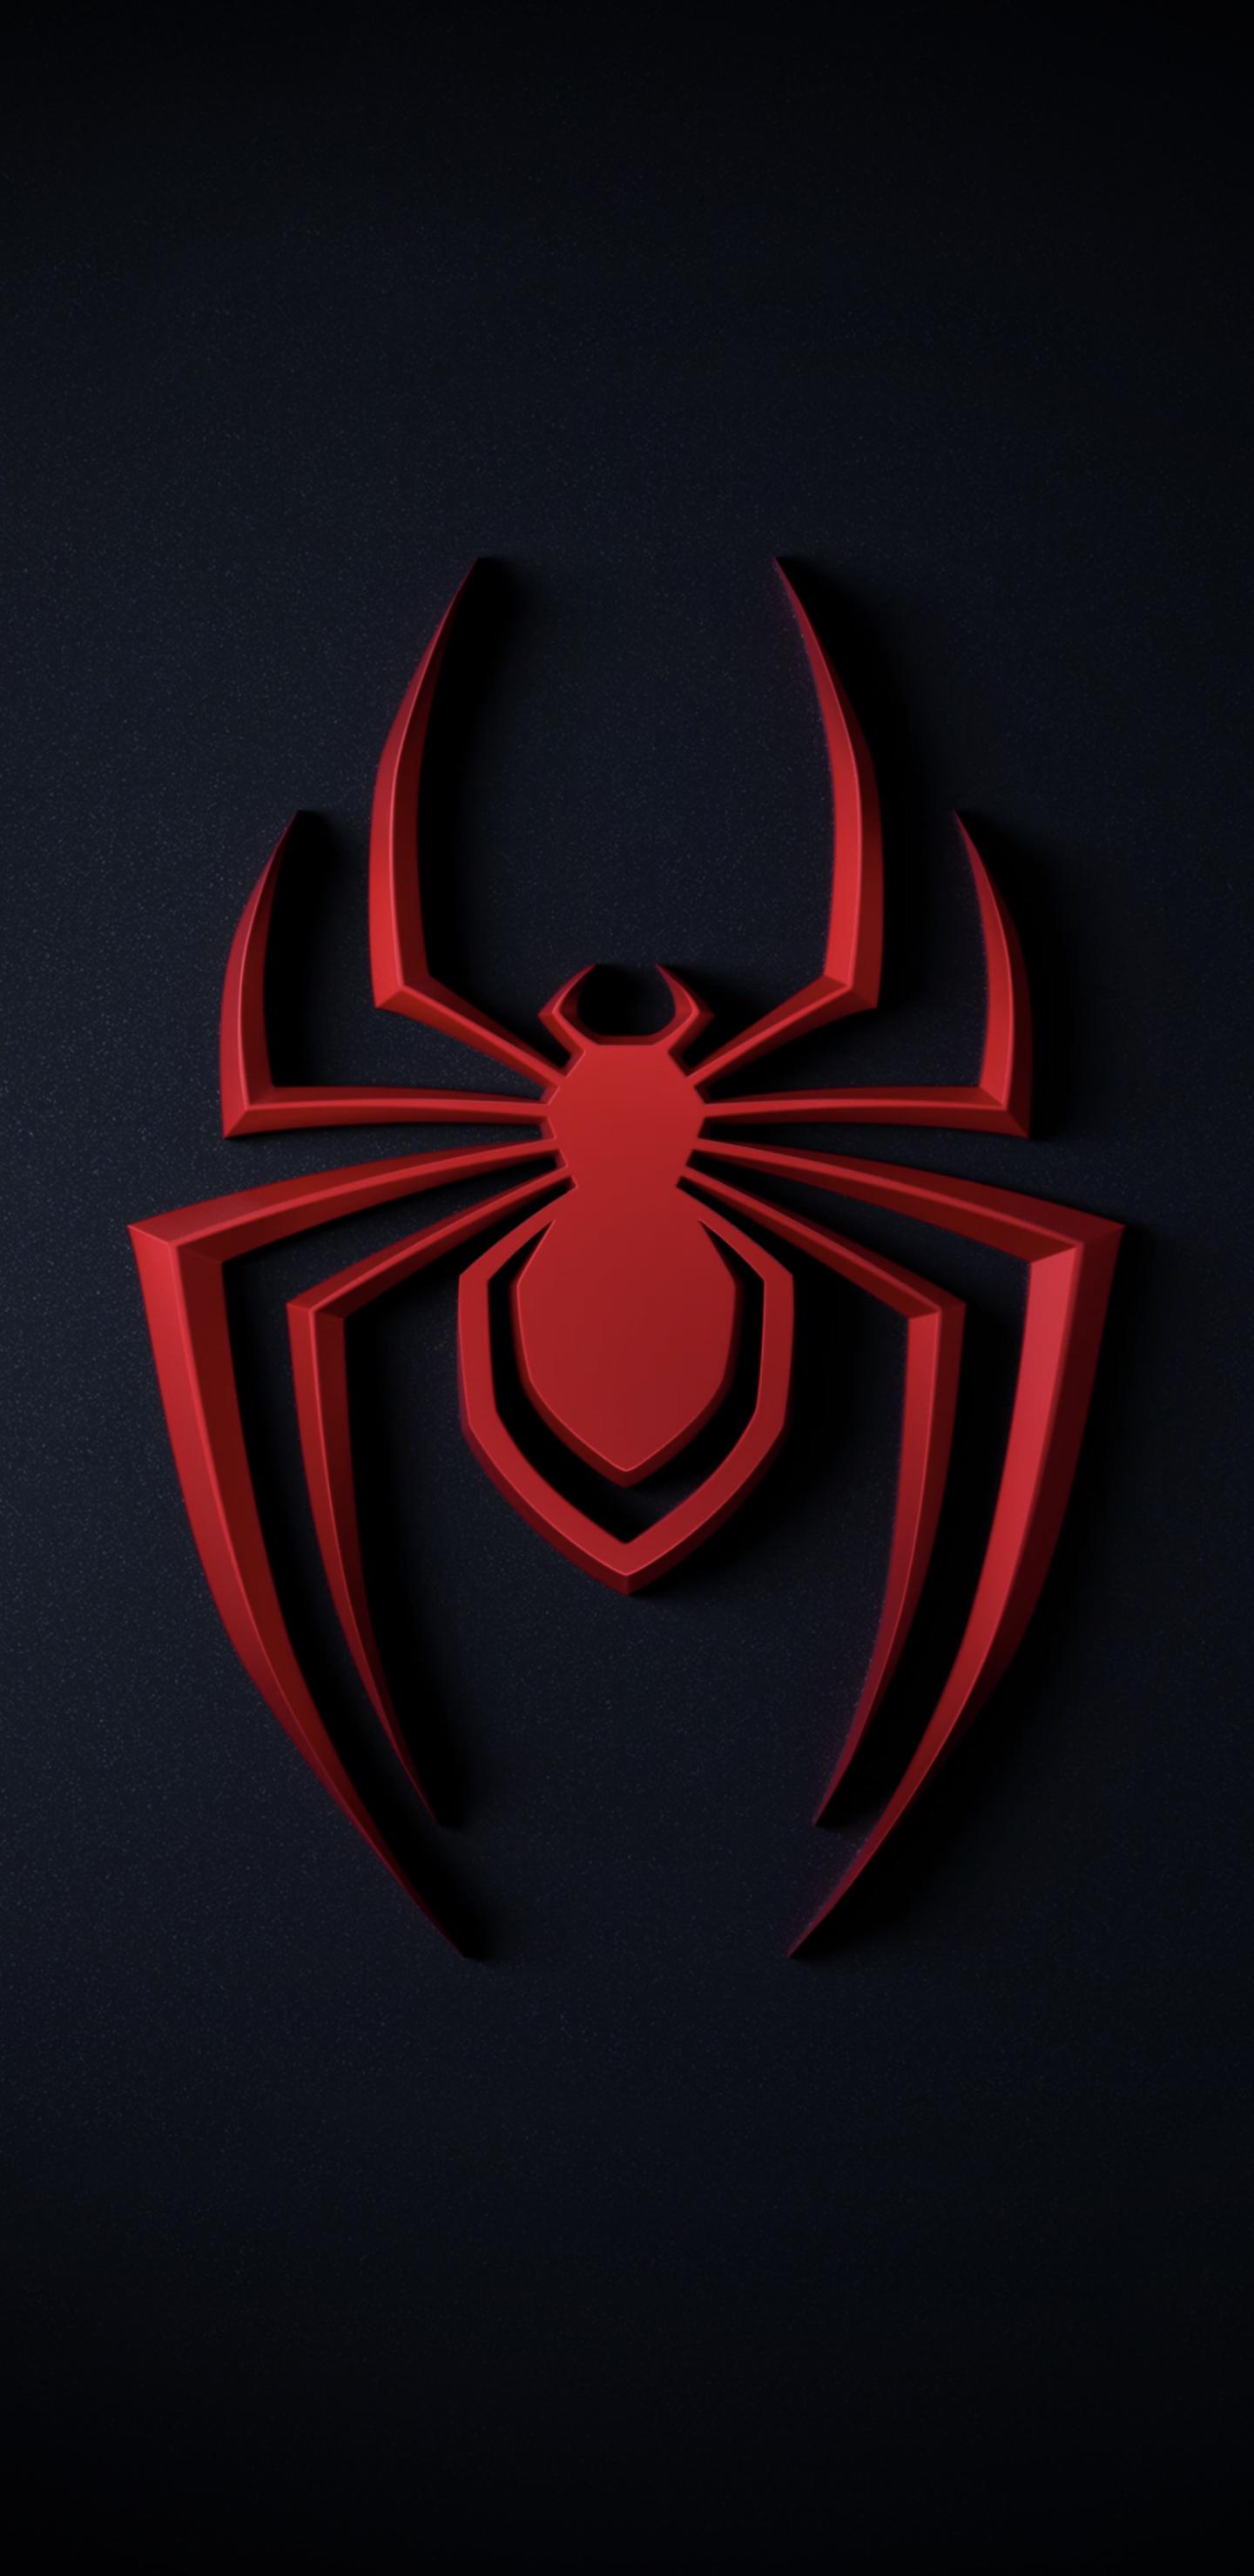 Miles Morales Wallpaper for iPhone 1440x2960